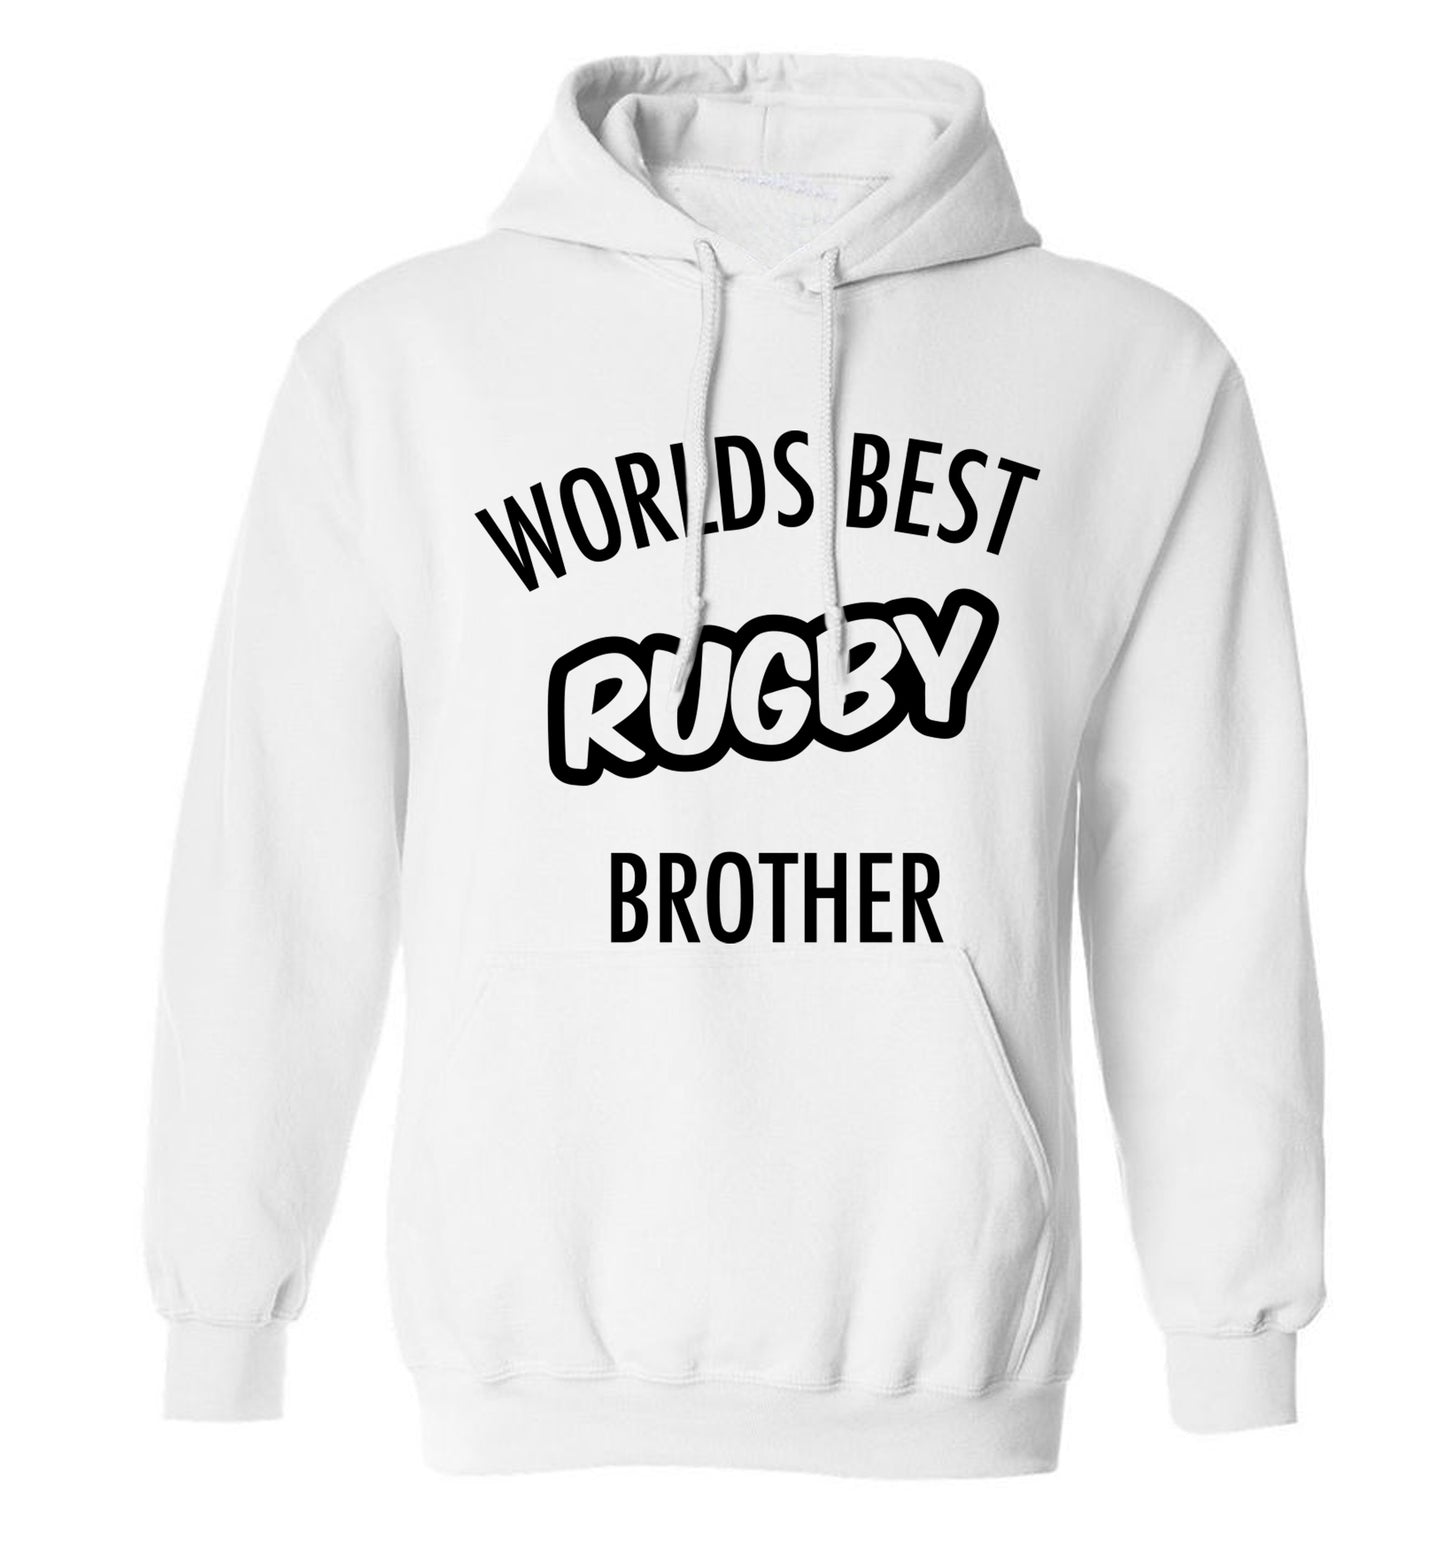 Worlds best rugby brother adults unisex white hoodie 2XL